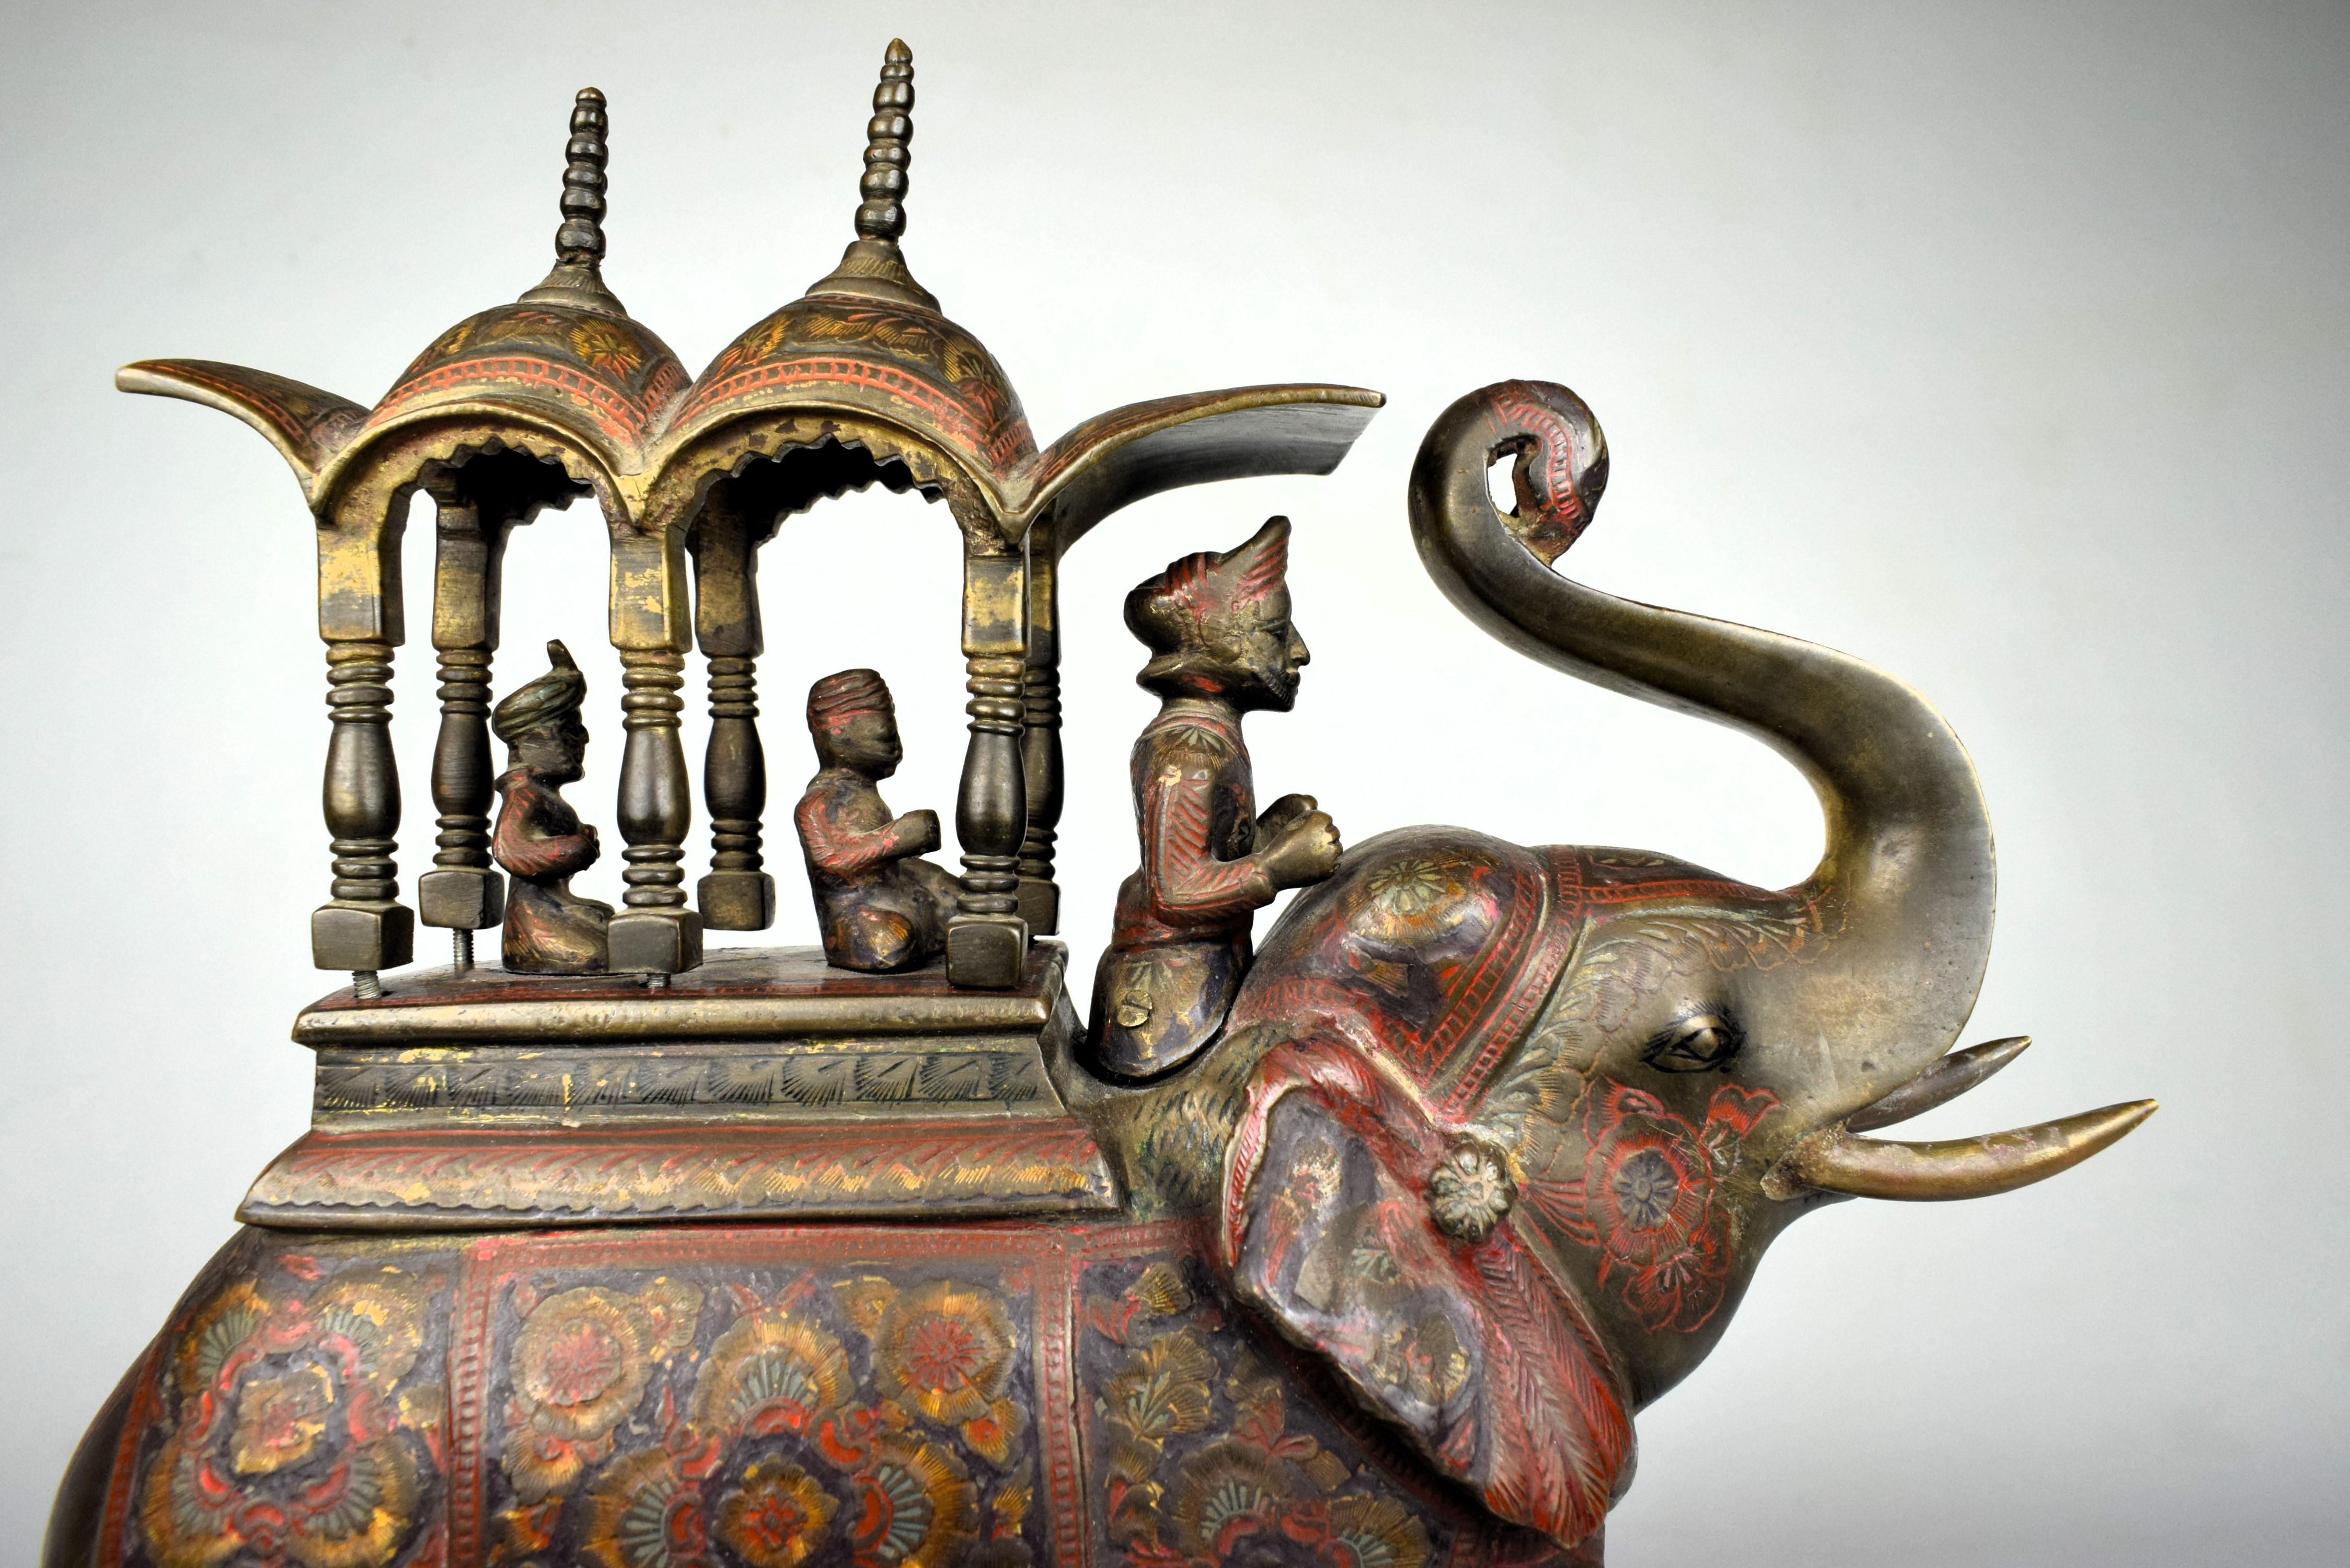 Anglo Raj Indian Moradabadi Hathi Howdah (Elephant Carriage) Carrying Royals, 19th Century For Sale